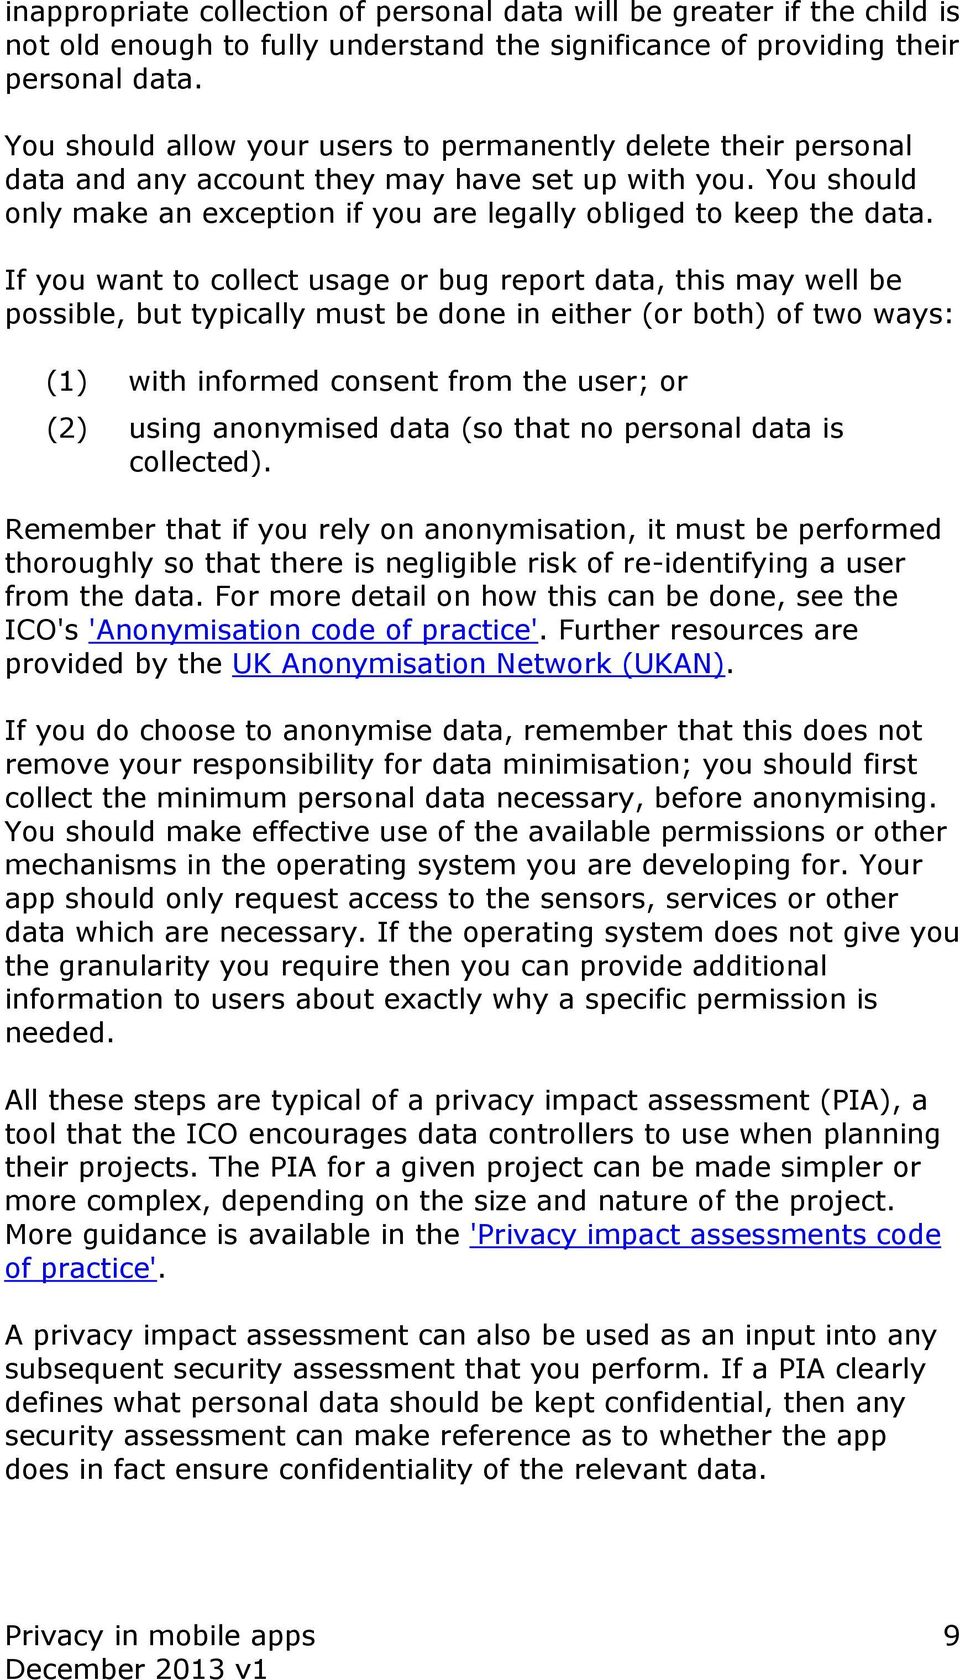 If you want to collect usage or bug report data, this may well be possible, but typically must be done in either (or both) of two ways: (1) with informed consent from the user; or (2) using